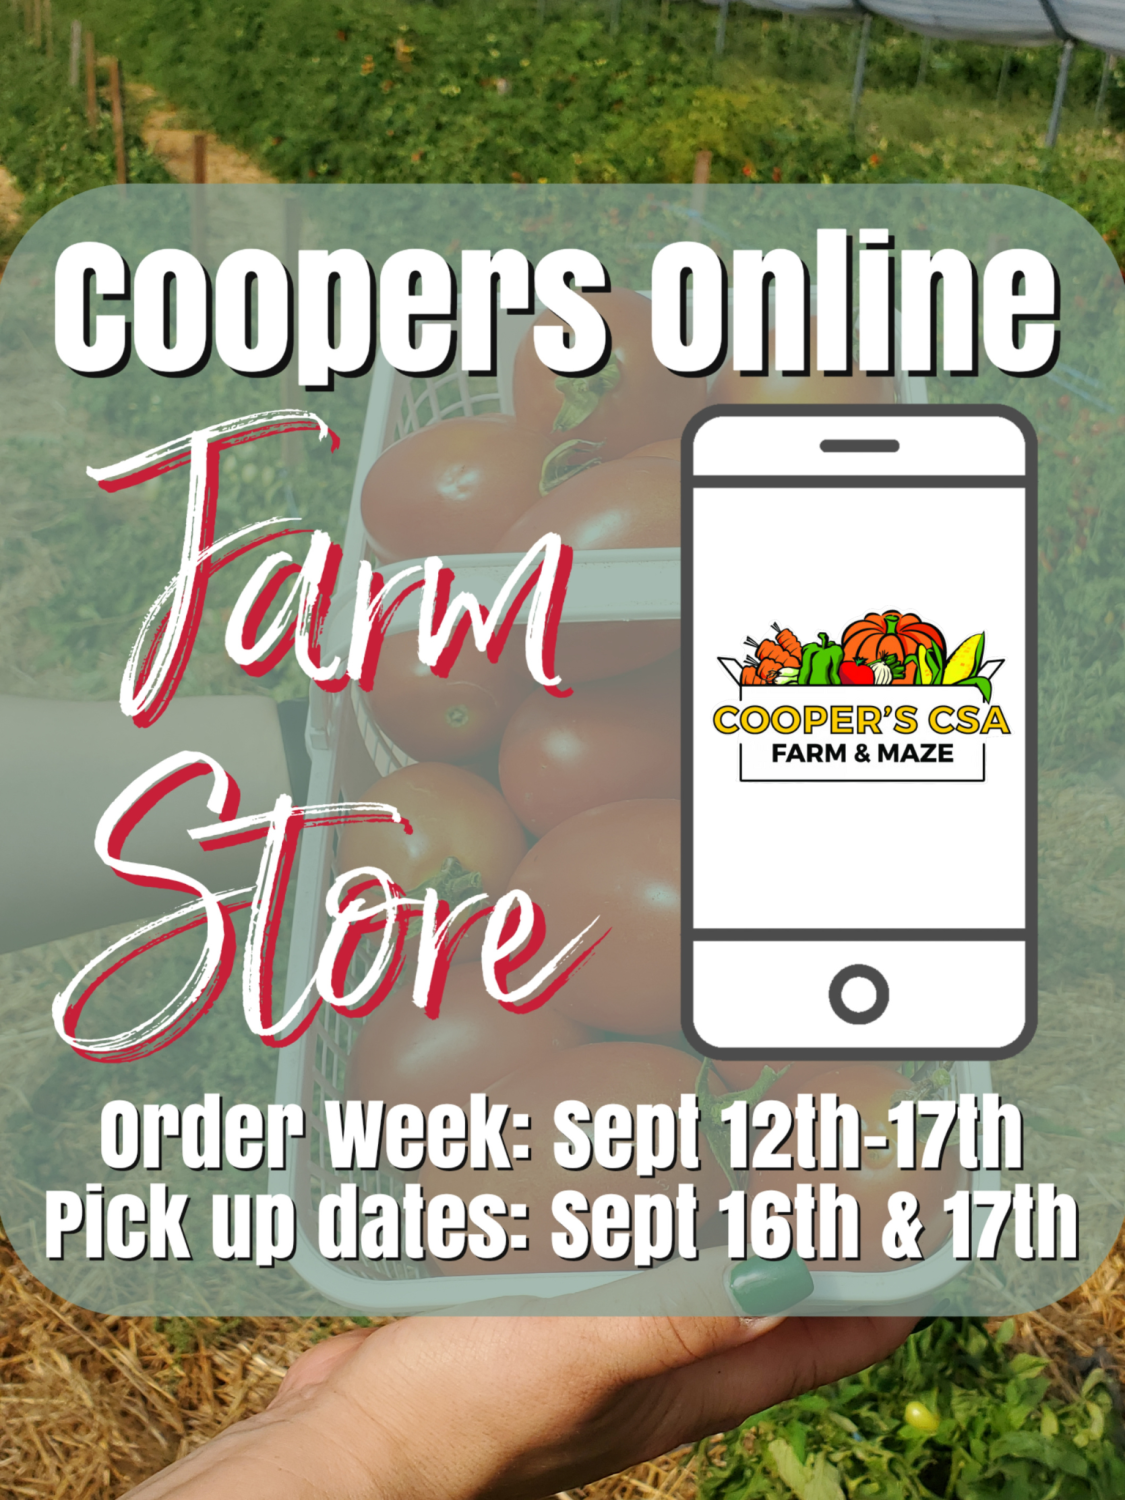 Previous Happening: Coopers Online Farm Stand- September 12th-17th